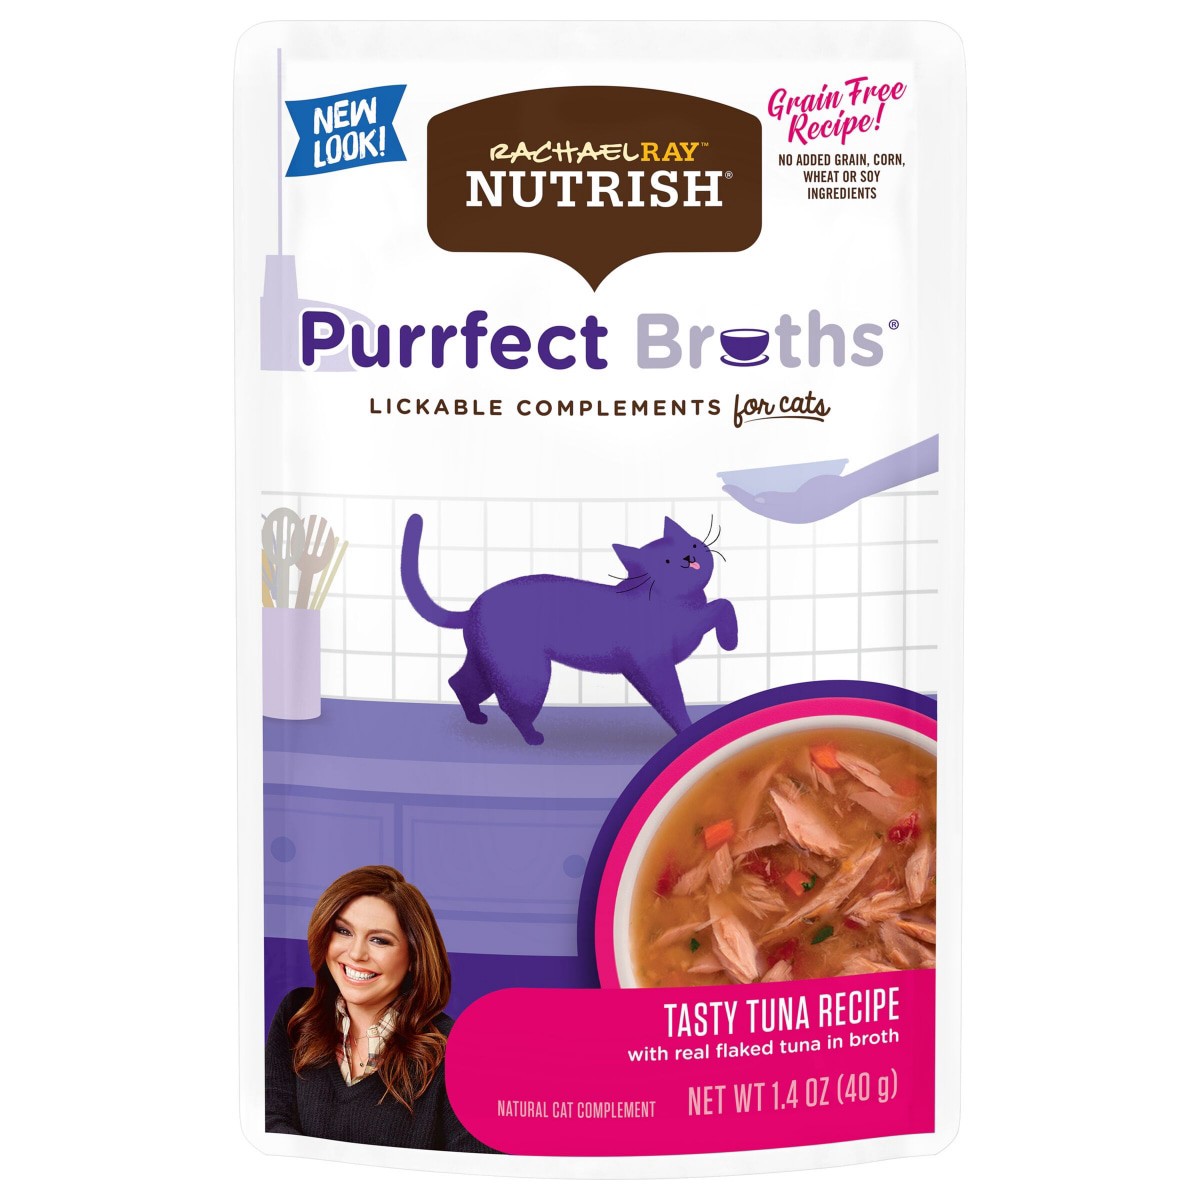 slide 17 of 17, Rachael Ray Nutrish Purrfect Broths All Natural Complement, Grain Free Tasty Tuna Recipe, 1.4 oz